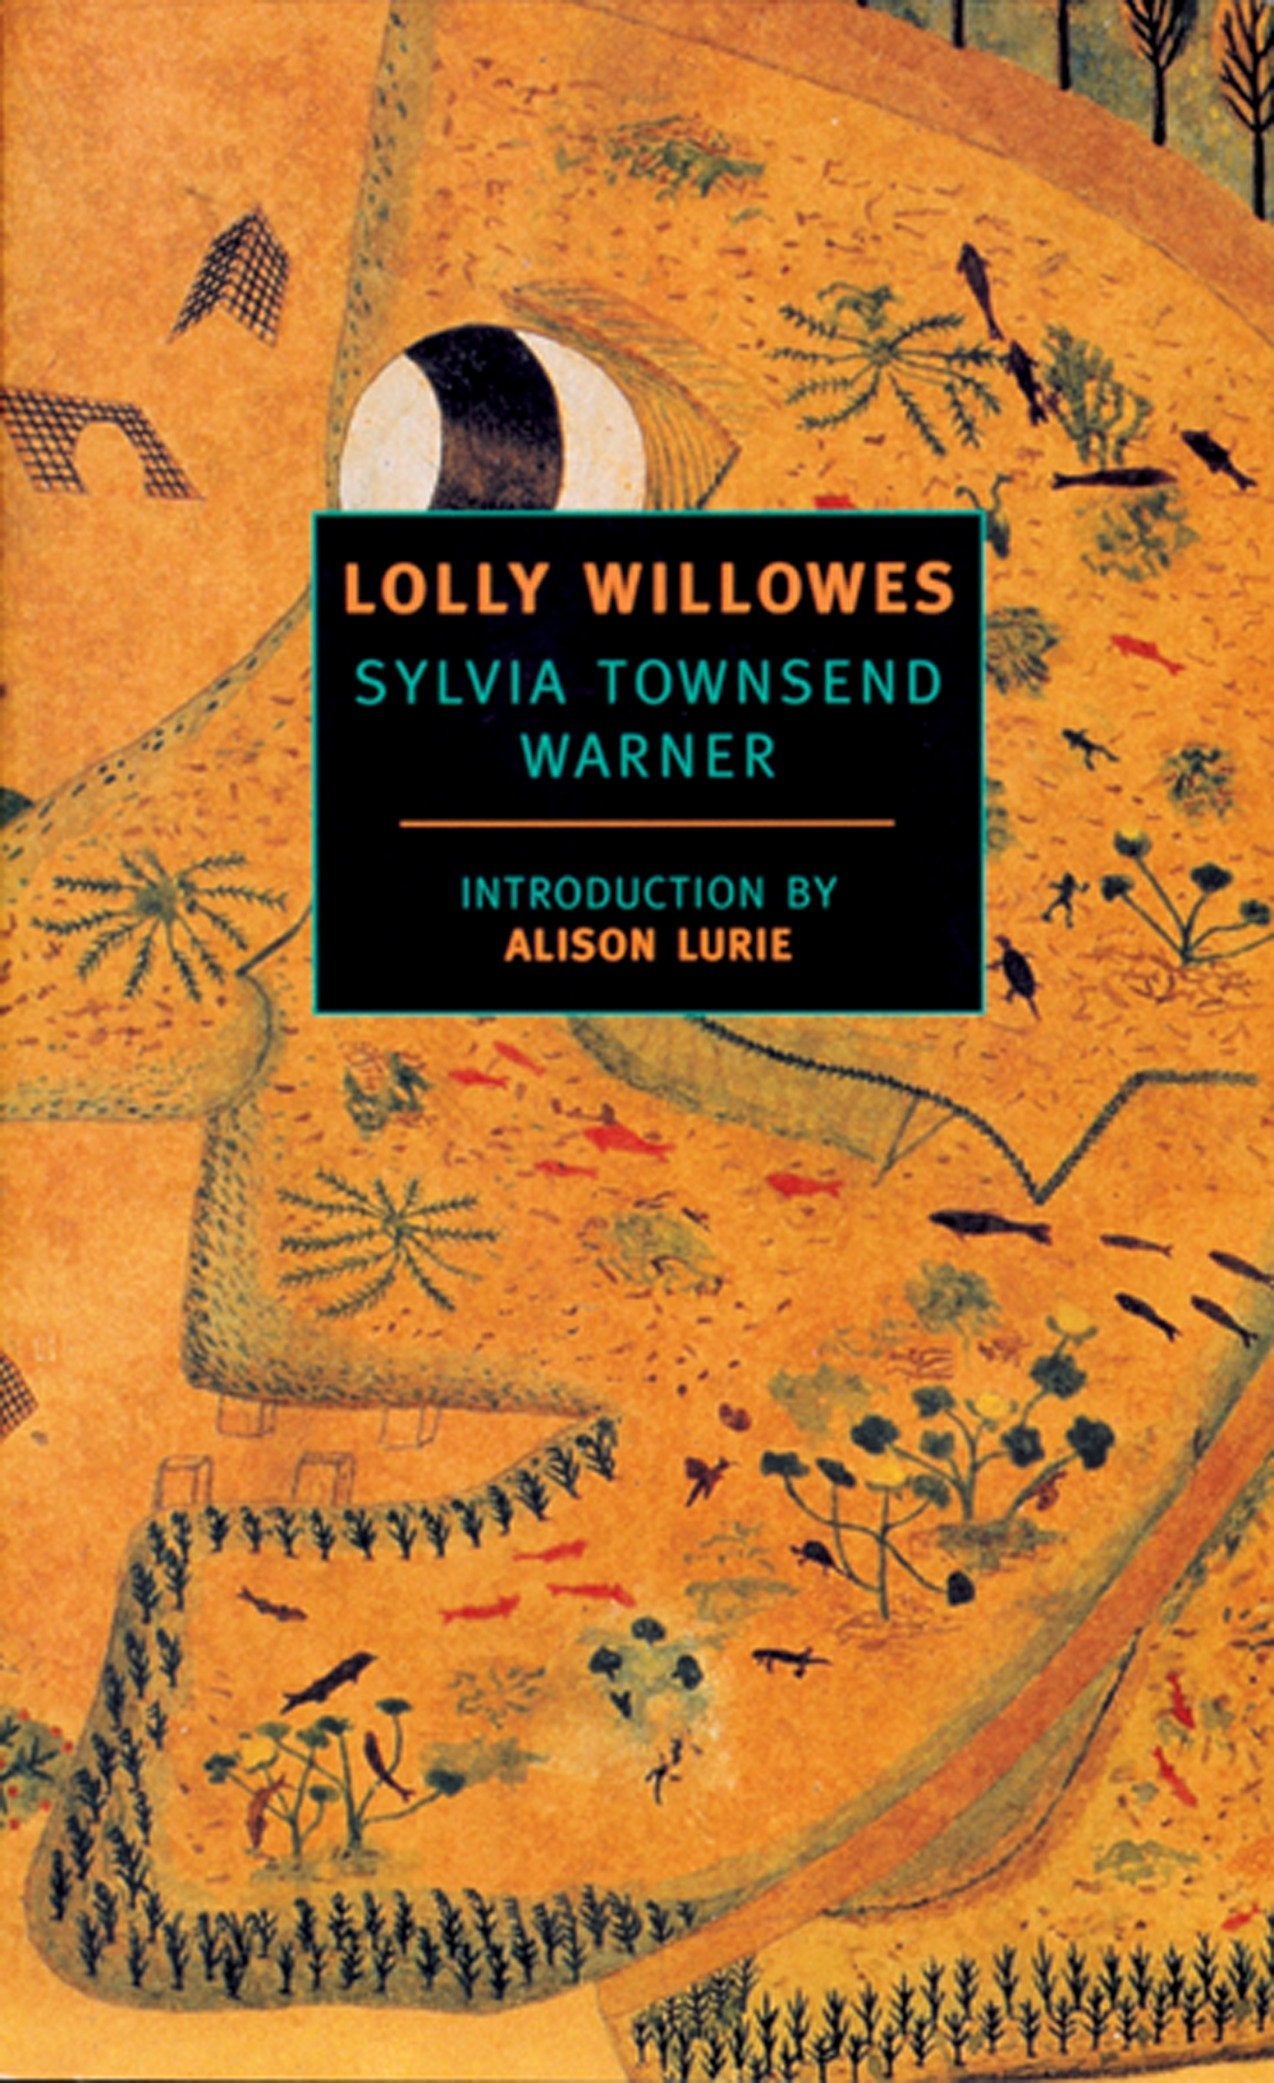 Lolly Willowes, by Sylvia Townsend Warner